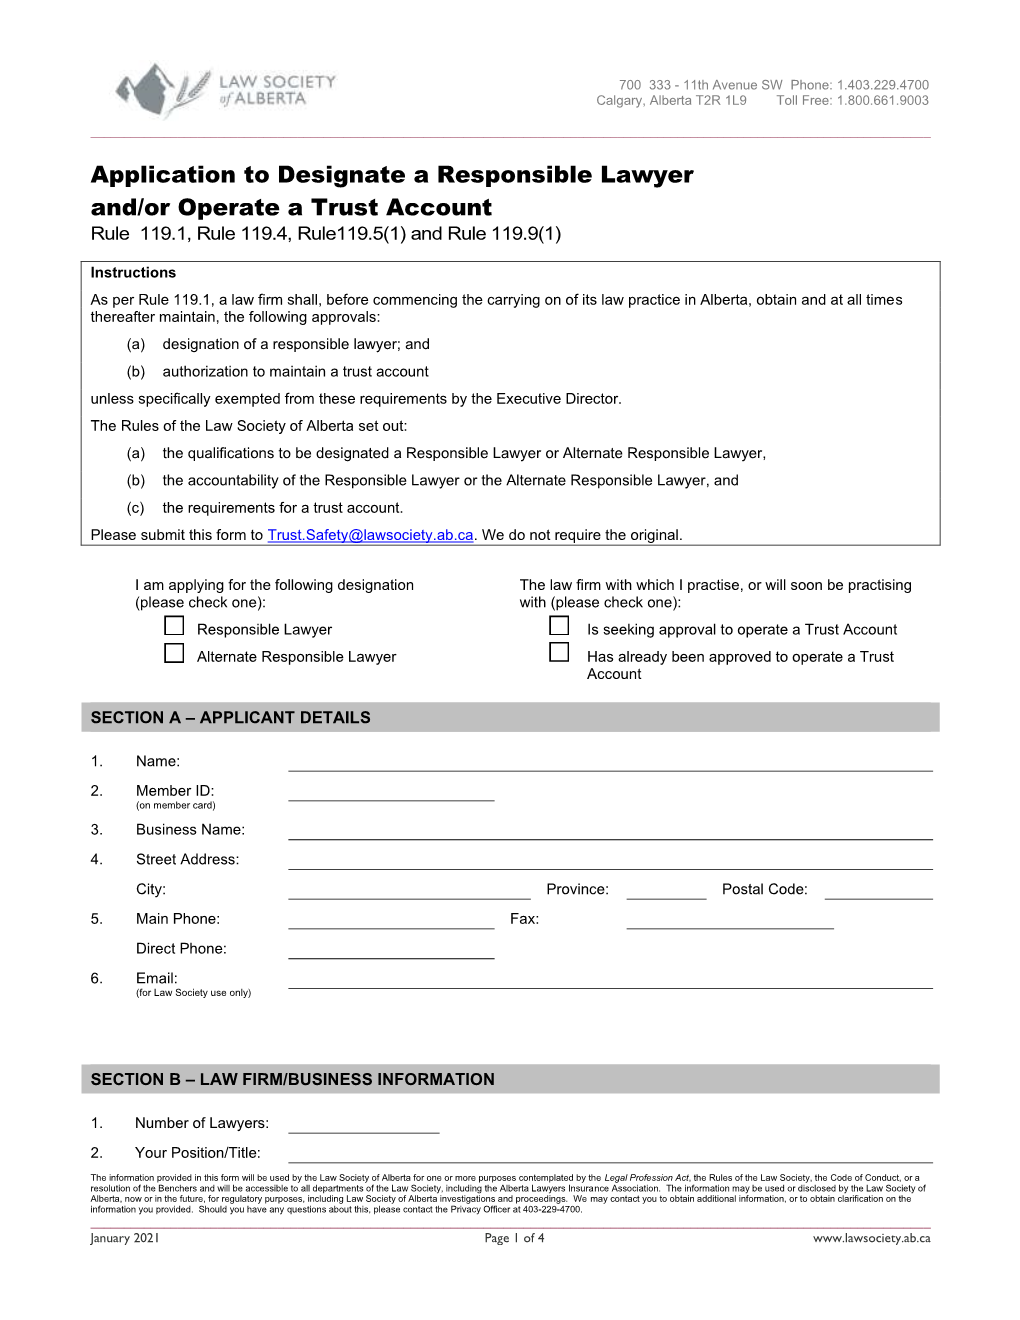 Application to Designate a Responsible Lawyer and Operate A